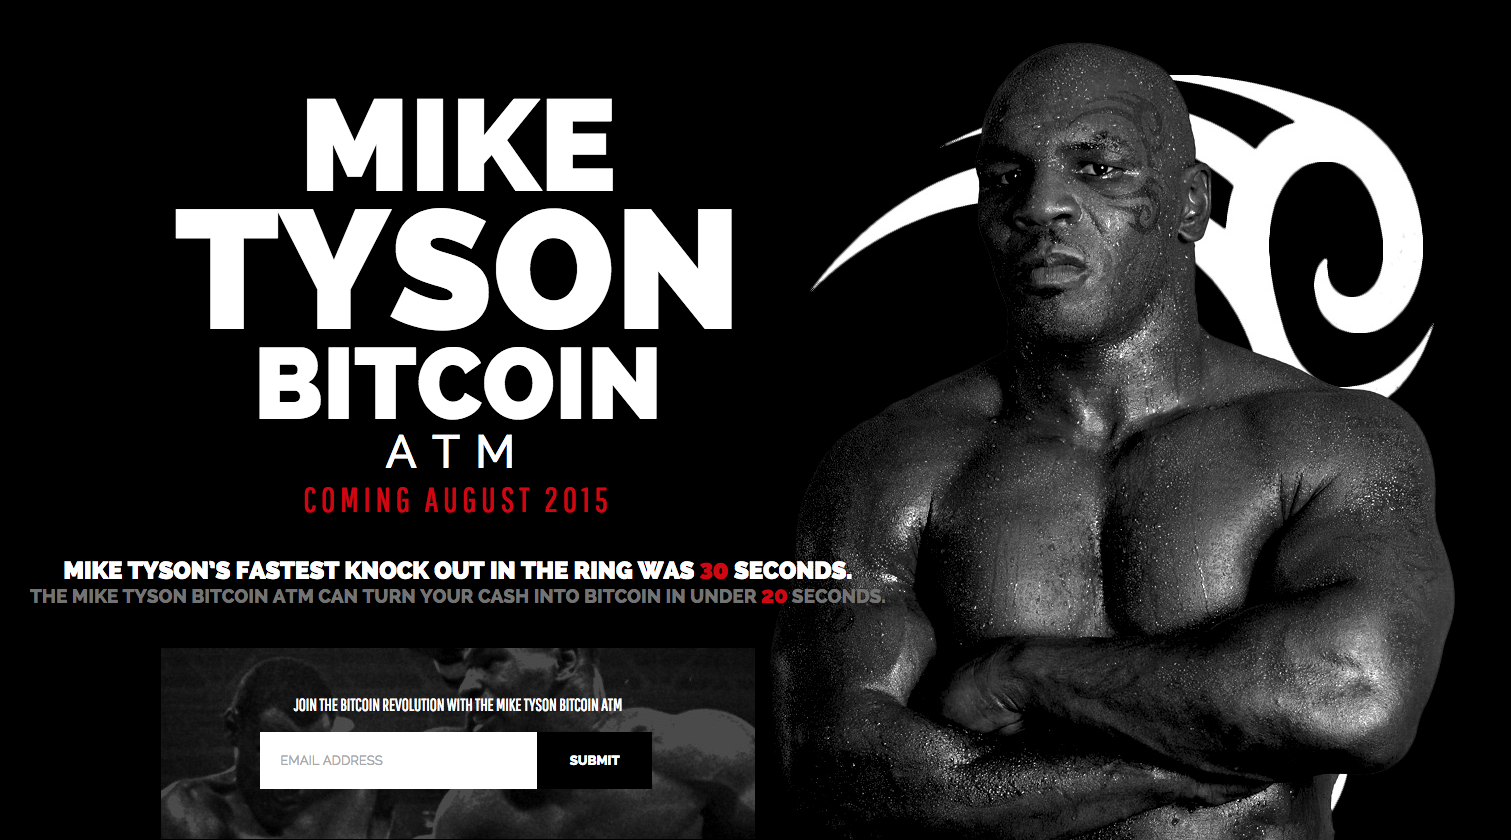 Mike Tyson apparently entering the bitcoin market bitcoin, bitcoin investment, Mike Tyson Bitcoin 1